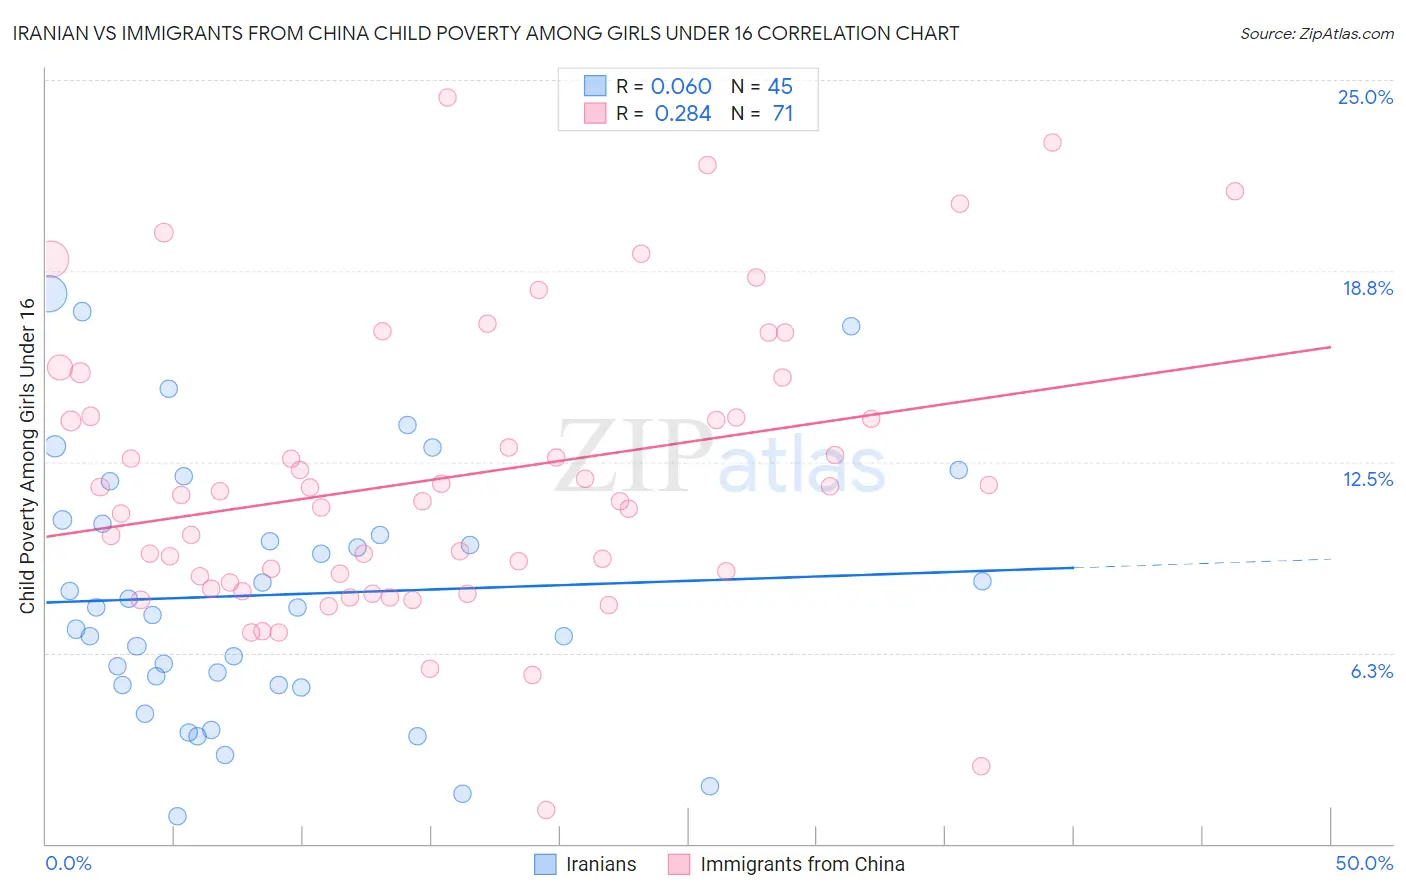 Iranian vs Immigrants from China Child Poverty Among Girls Under 16